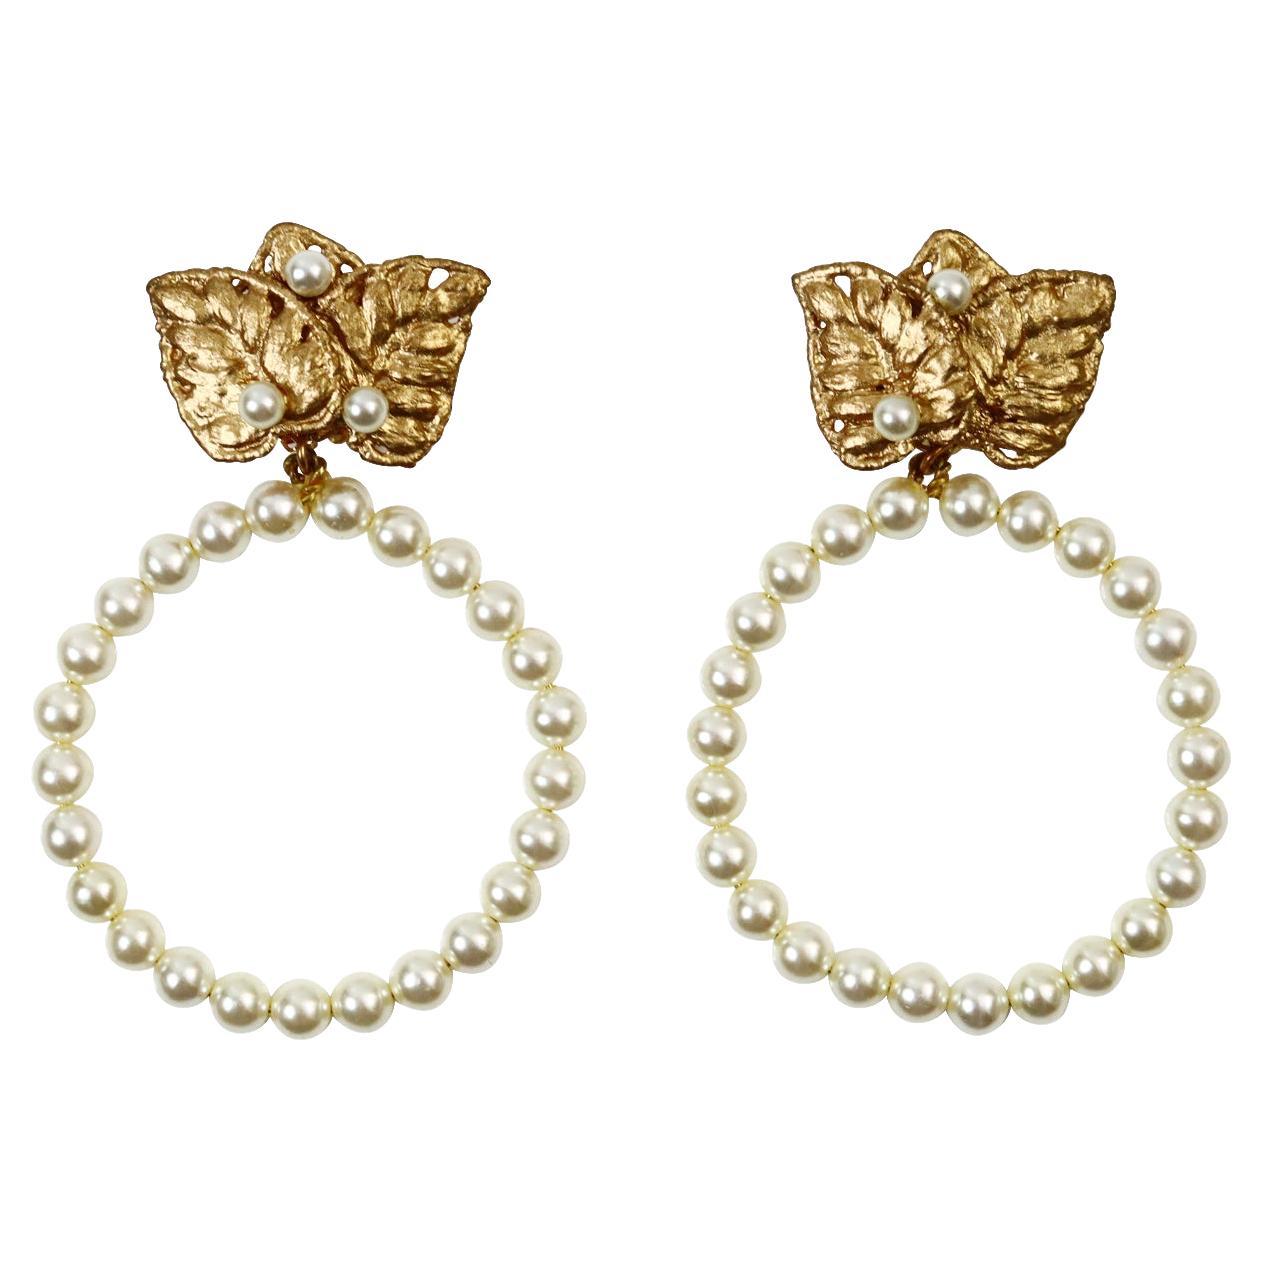 Vintage Martha Montero Gold and Faux Pearl Dangling Hoop Earrings Circa 1980s